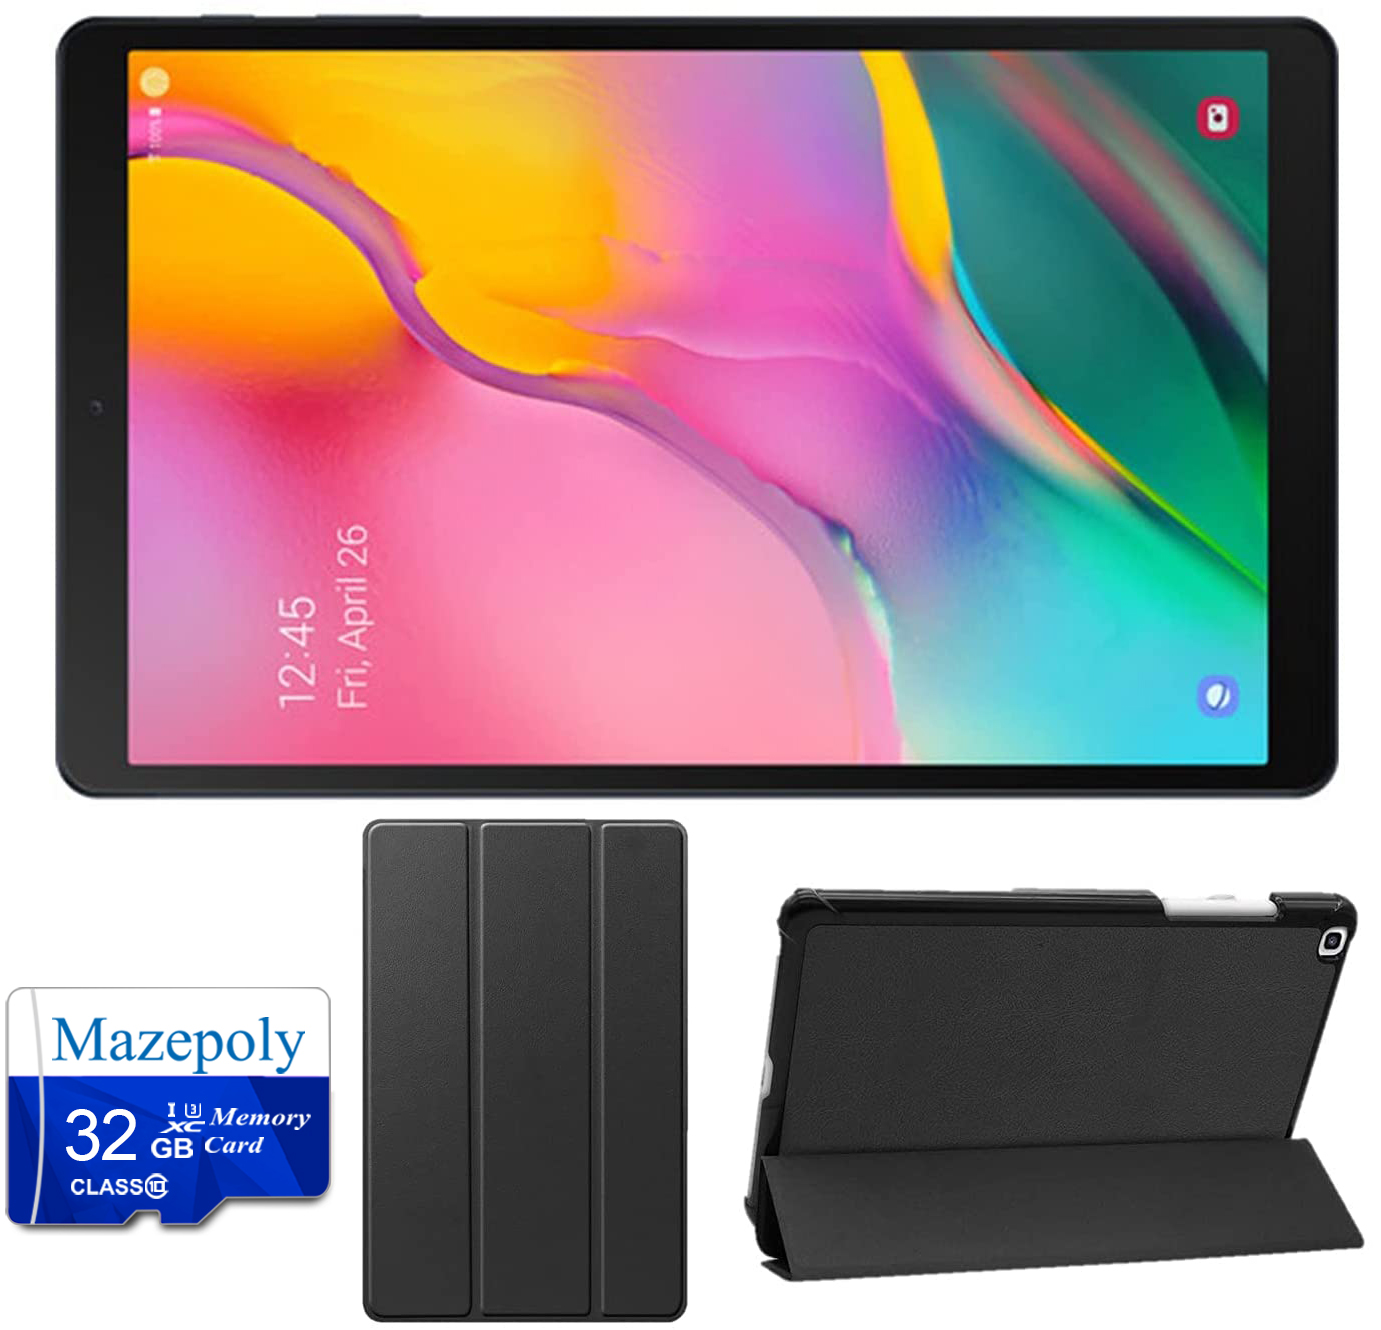 Samsung Galaxy Tab A 8.0-inch (2019 Version Newest) 32GB Touchscreen Tablet Bundle, Quad-Core Qualcomm Snapdragon Processor, 2GB RAM, Android 9.0 OS (LTE Unlocked, Black) with Mazepoly Accessories - image 2 of 7